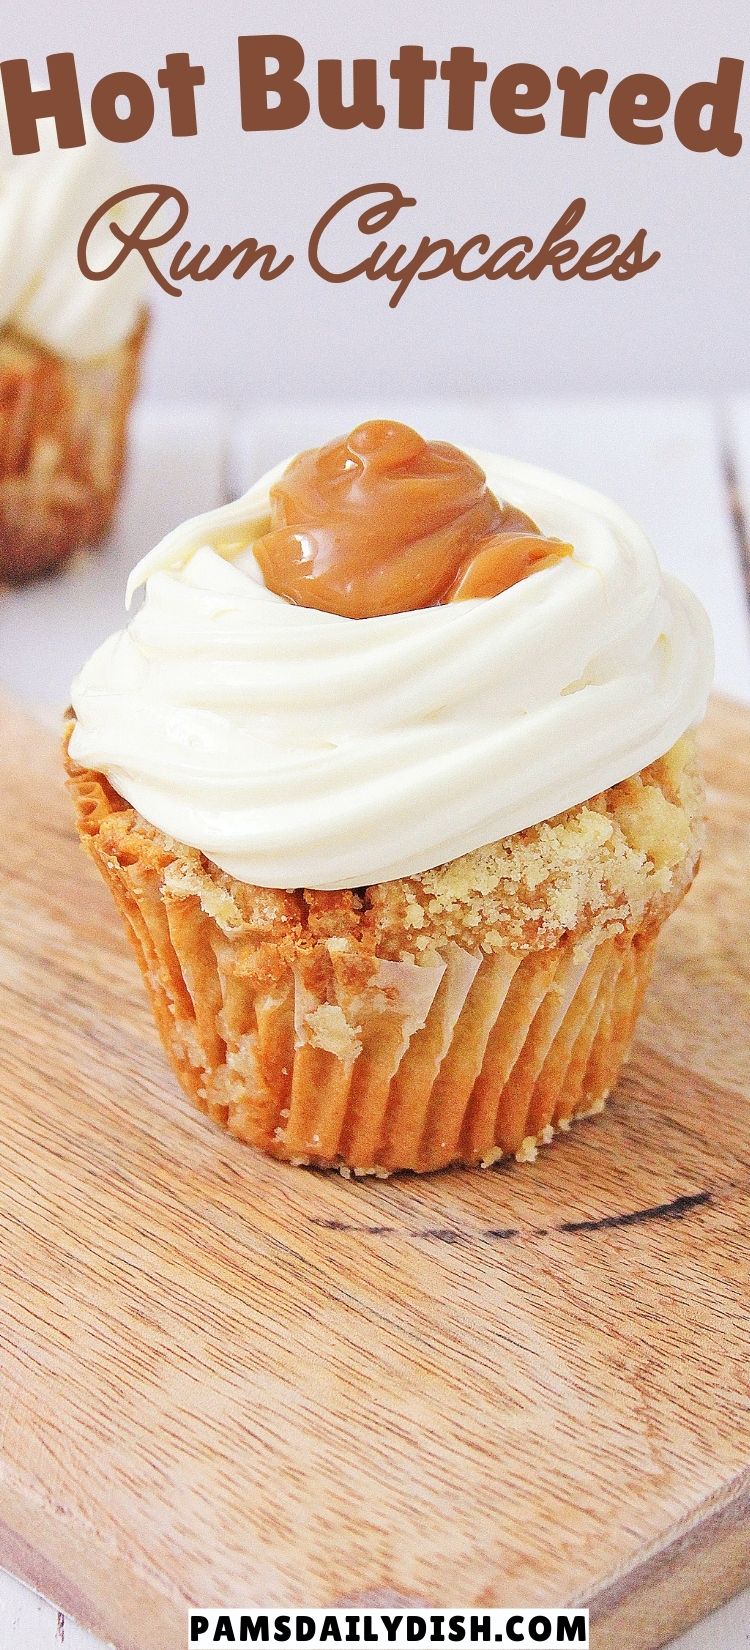 These Hot Buttered Rum Cupcakes are tender, flavorful, and topped with a rum frosting and sweet caramel sauce. The perfect dessert. via @skinnydesserts